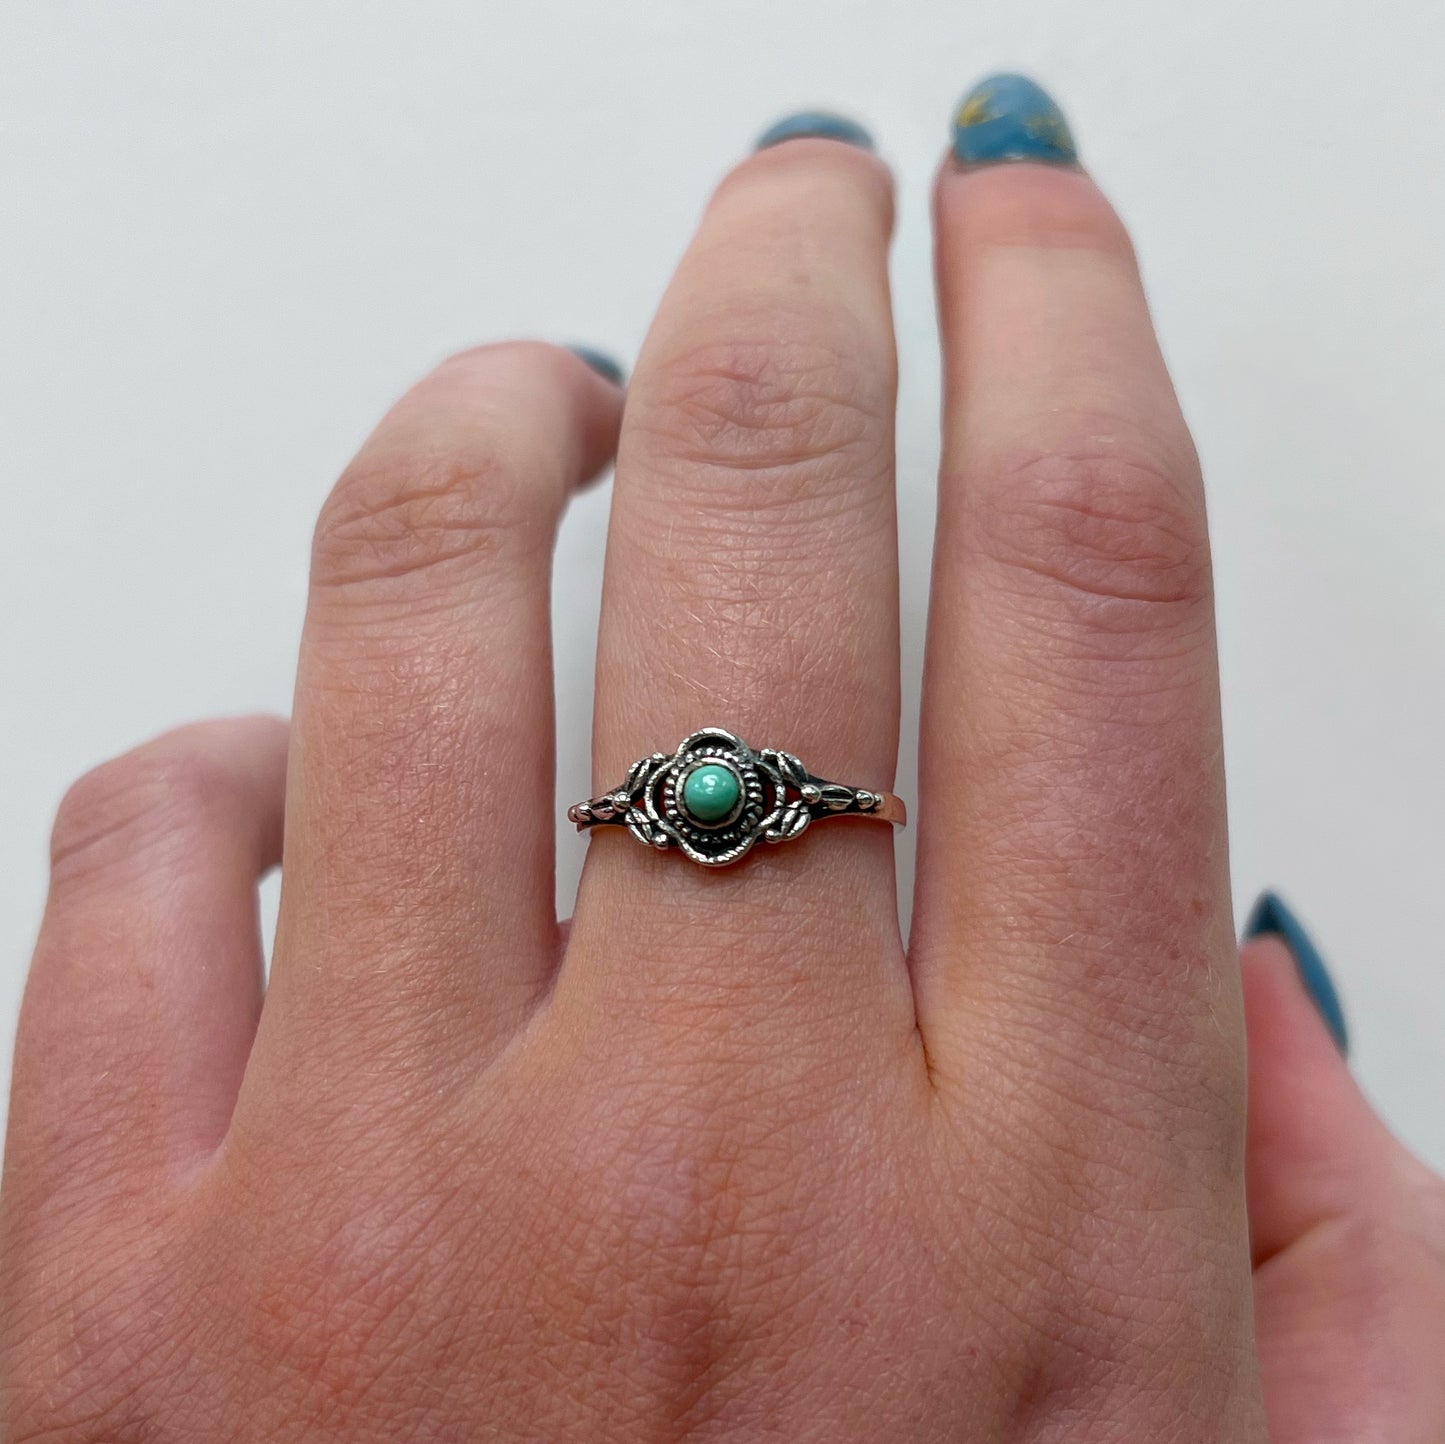 Sterling Silver Dainty Bohemian Inspired Turquoise Ring - Size Q